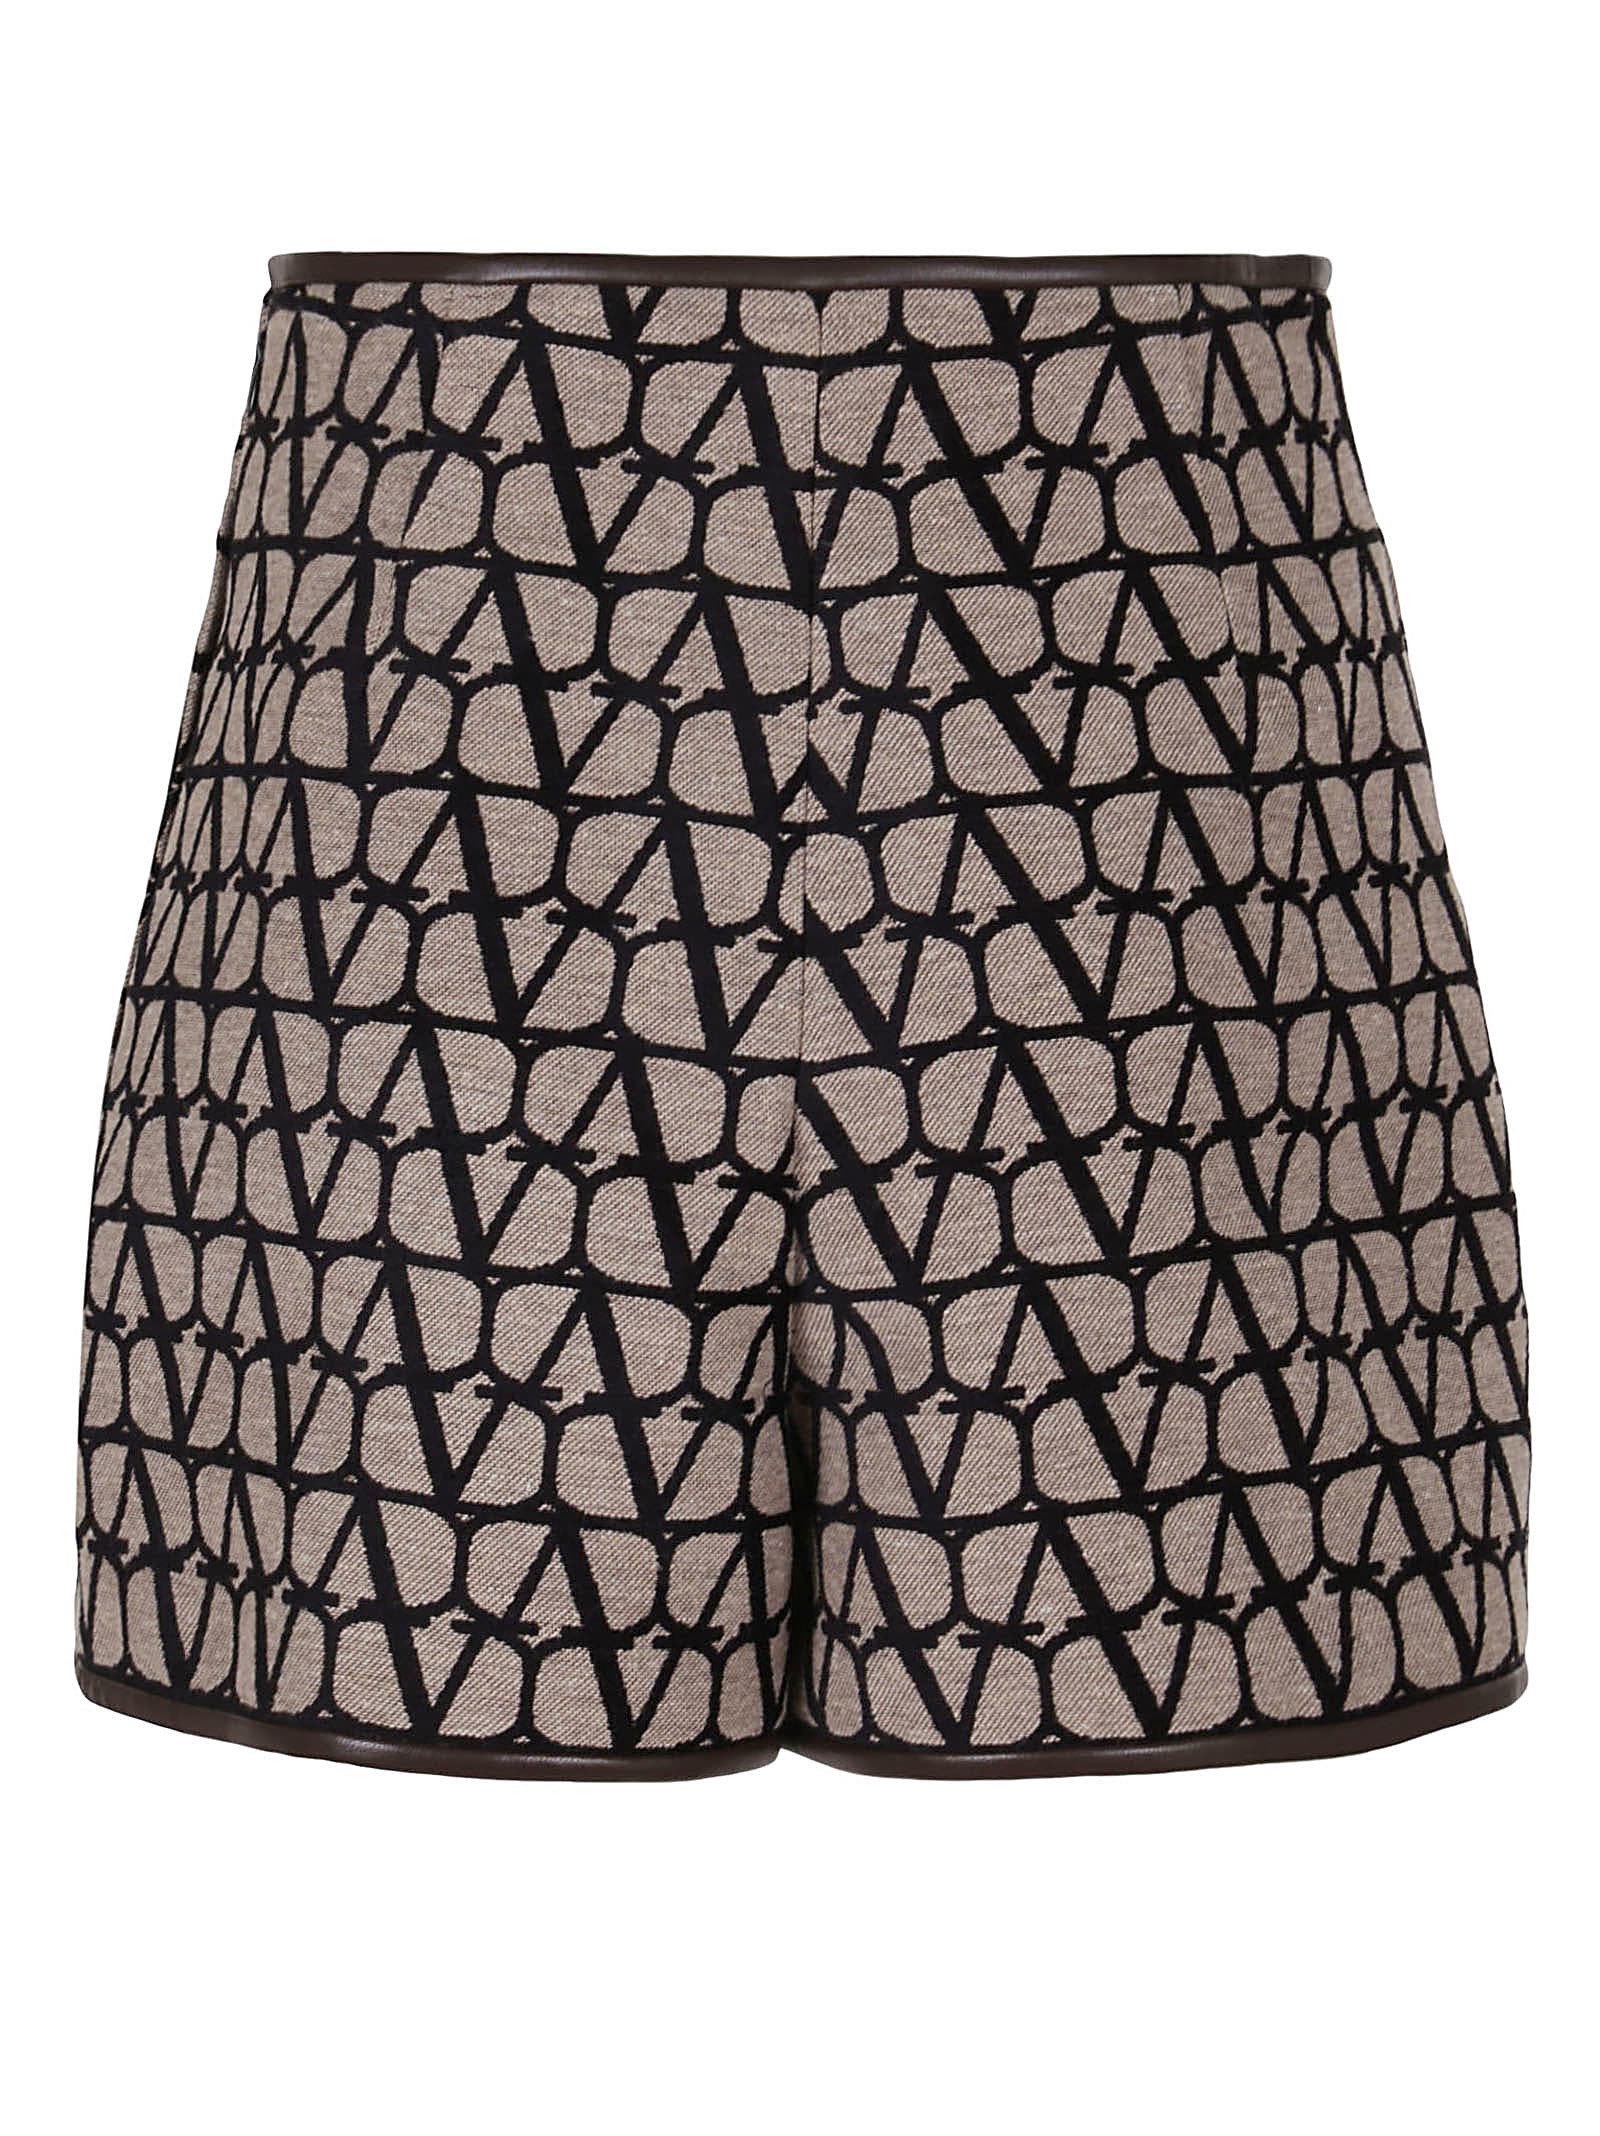 VALENTINO SHORT - WITH LEATHER DETAILS 